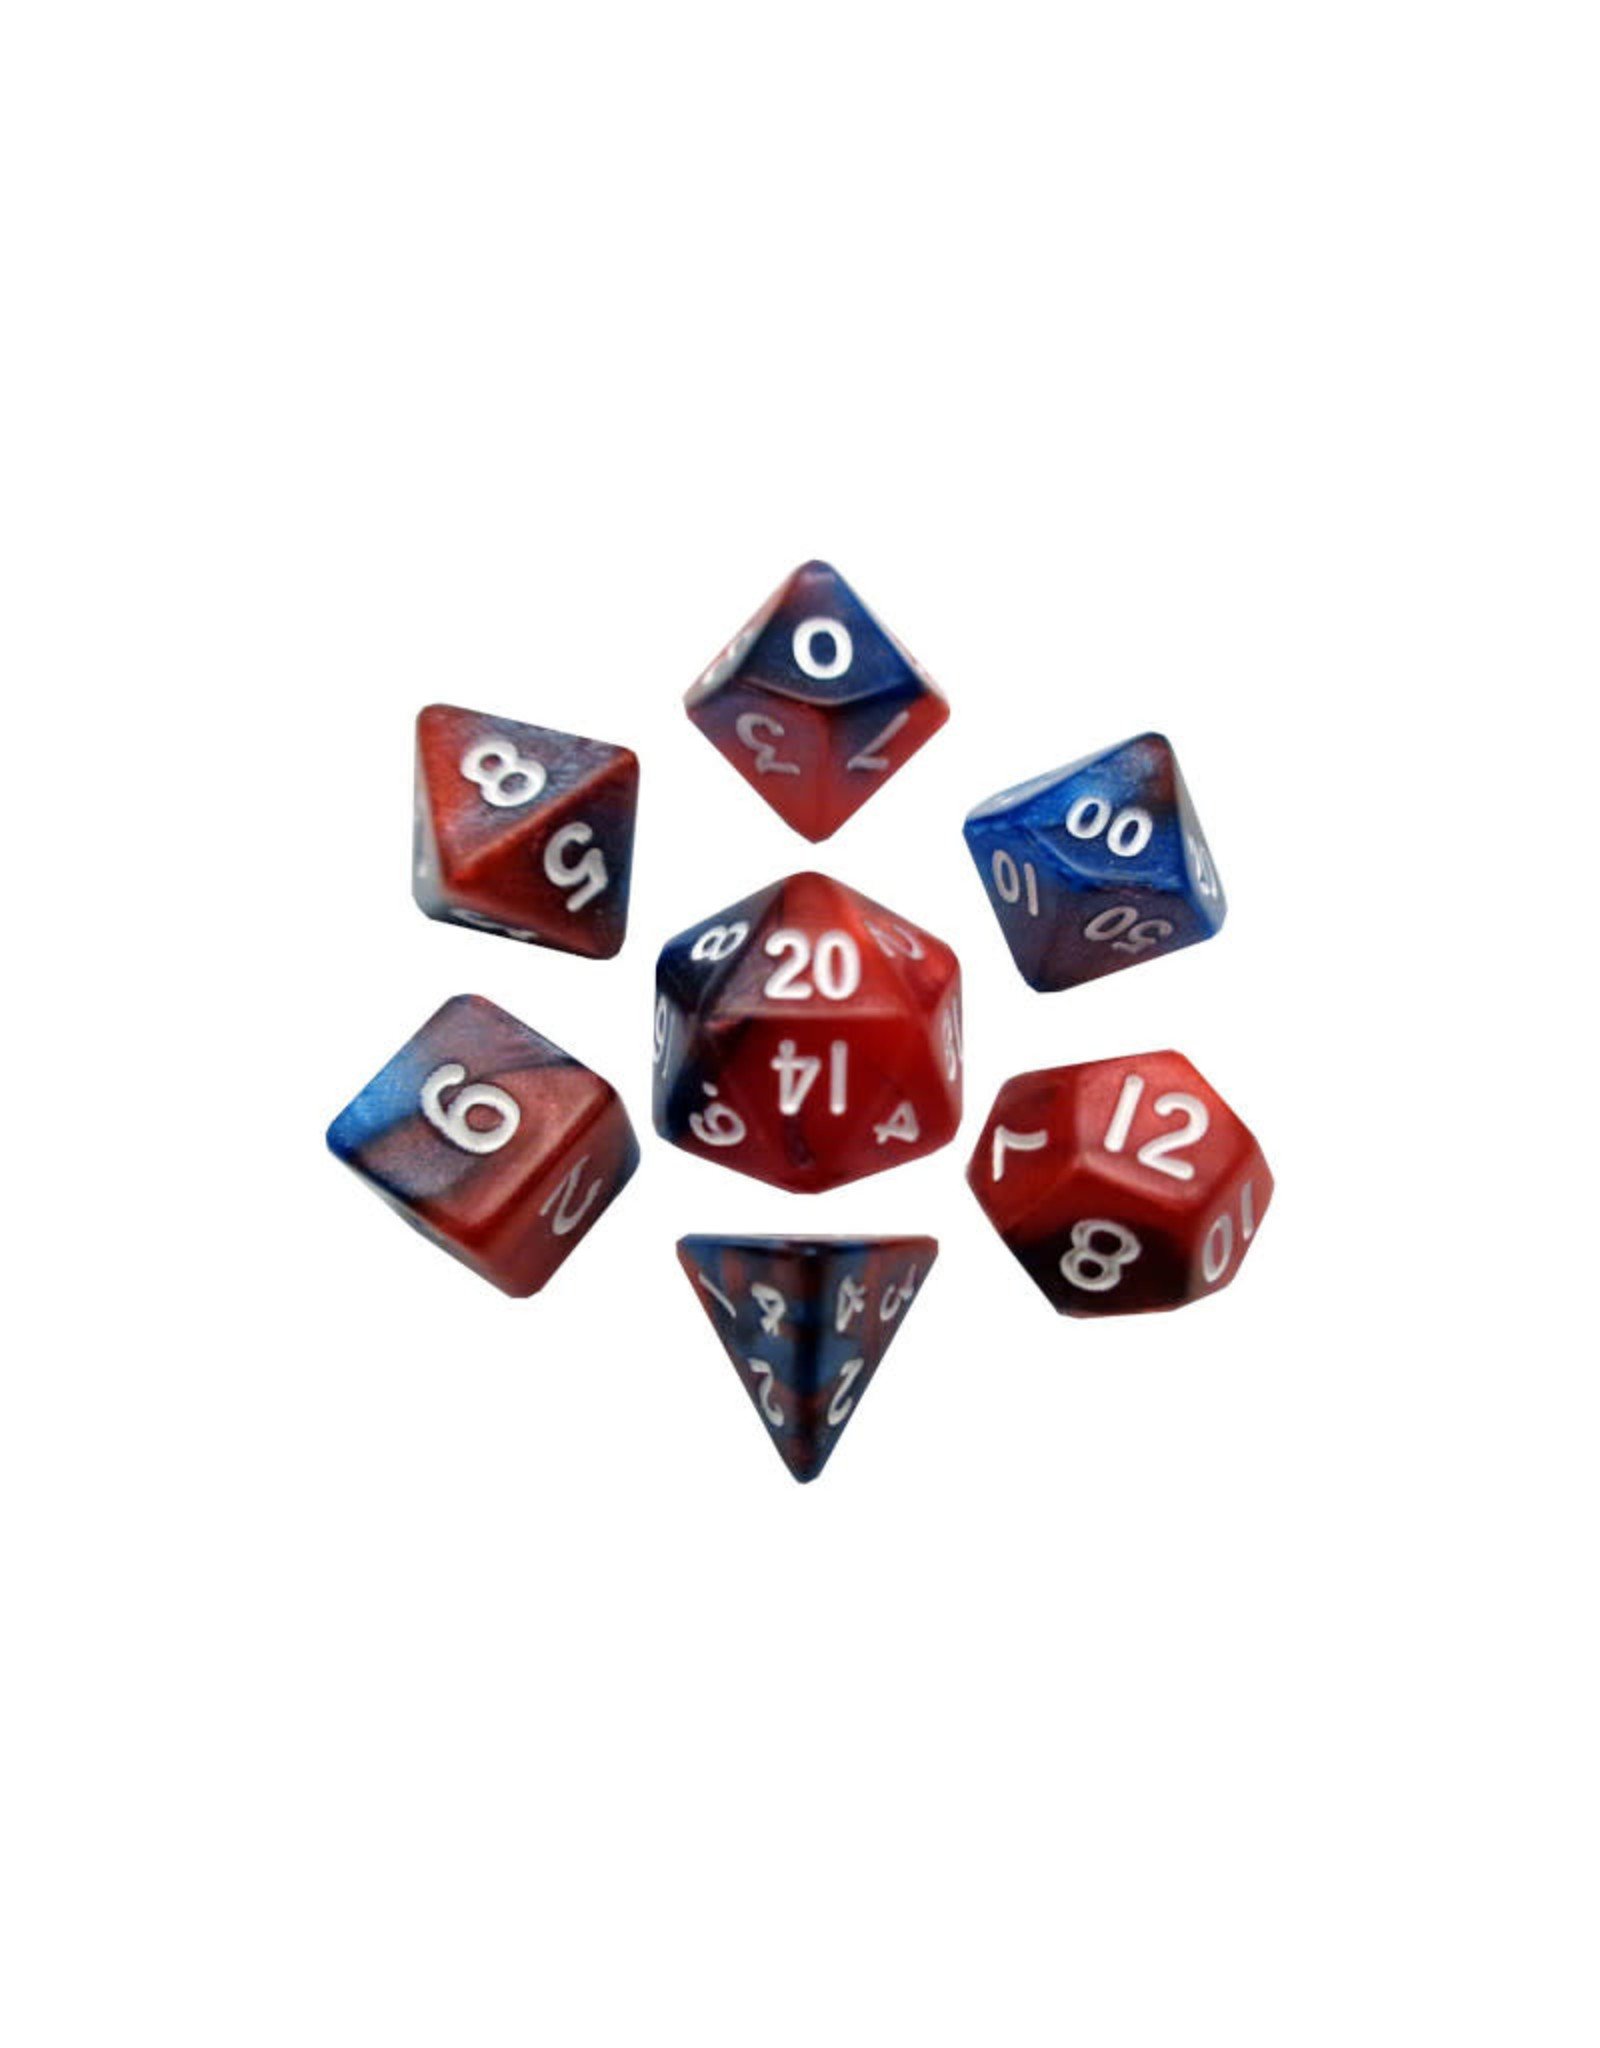 Metallic Dice Games Mini Polyhedral Dice Set (7) Red with Blue